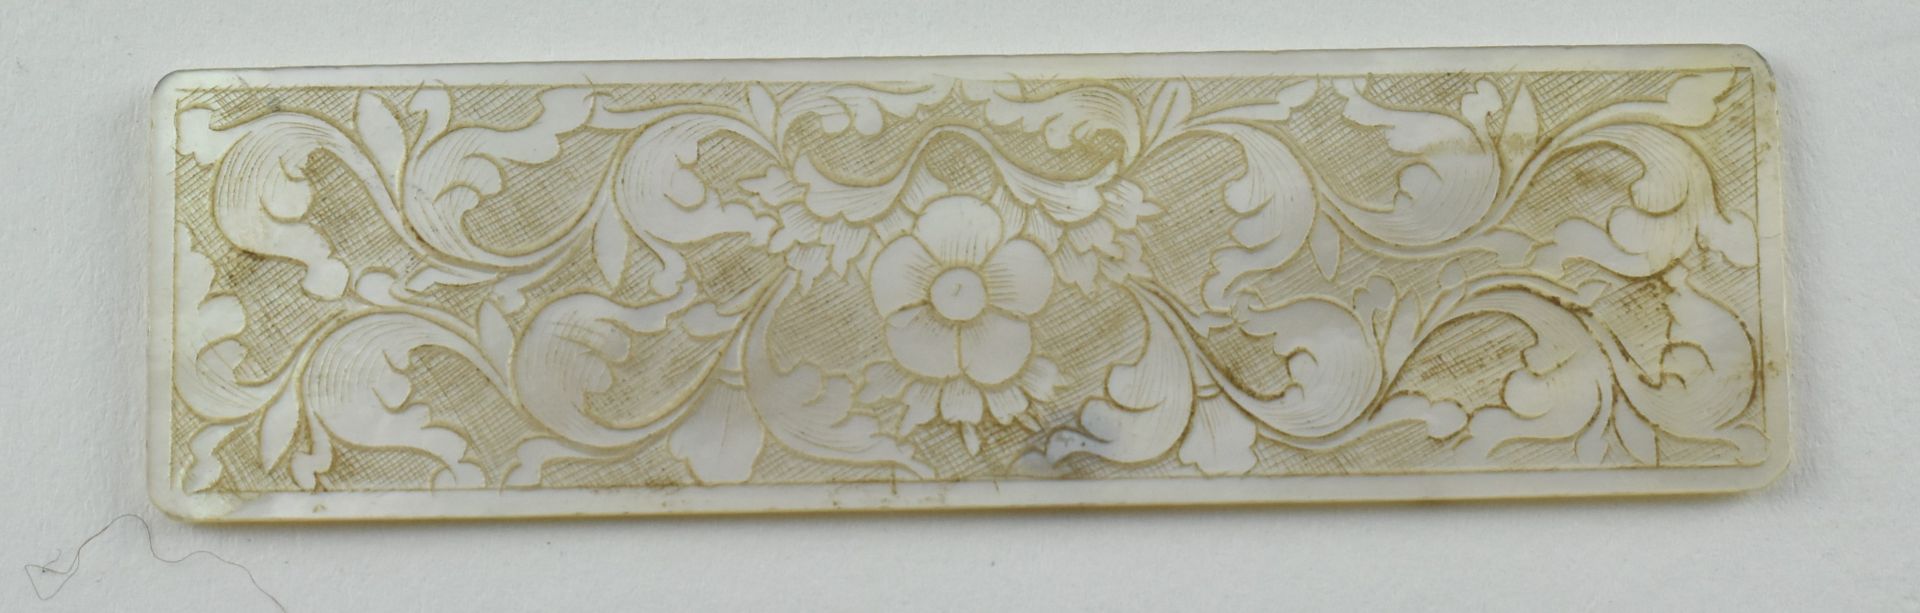 QING DYNASTY MOTHER OF PEARL GAMING TOKENS 清十三行贝母筹码 - Bild 11 aus 11